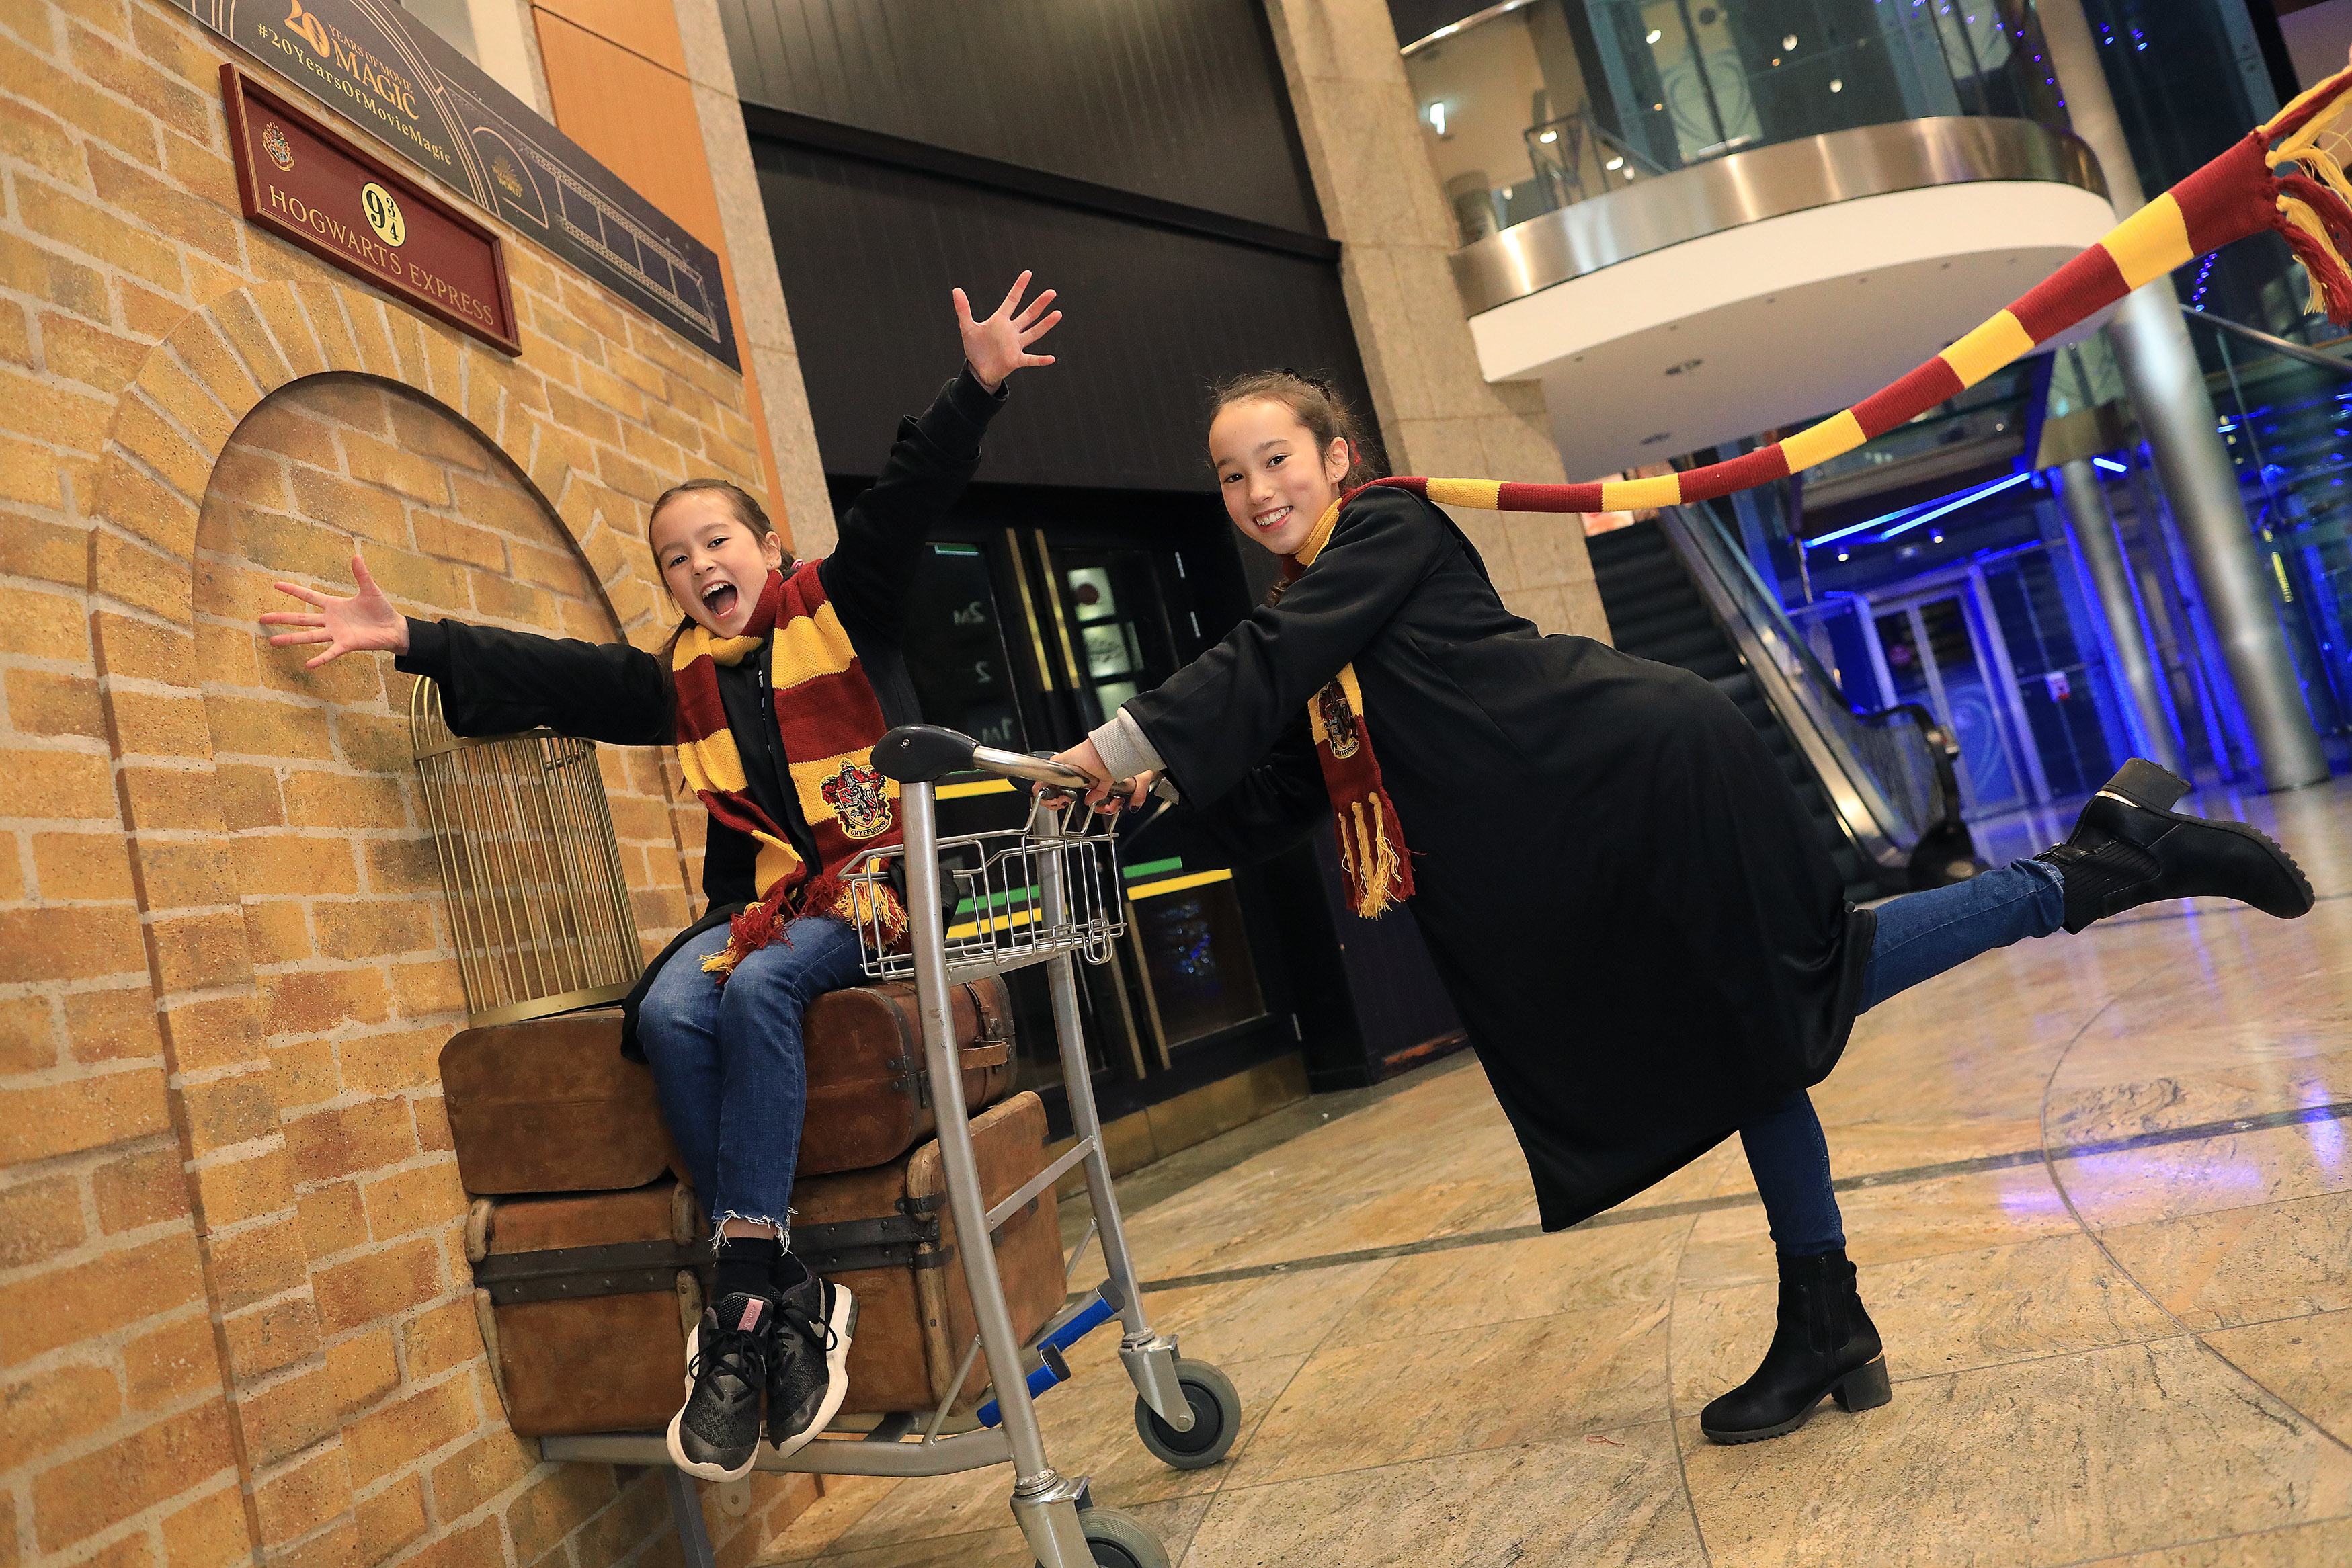 Maya and Lia Sheils (10/11 yrs) pose with the Harry Potter Platform 9 ¾ trolley that was unveiled today in Dundrum Town Centre, Dublin. The trolley has been touring the UK and Ireland, to celebrate the 20th anniversary of Harry Potter and the Philosophers Stone release in UK and Irish cinemas, with the film returning to cinemas for special screenings, including Movies @ Dundrum showing all eight installments this weekend .